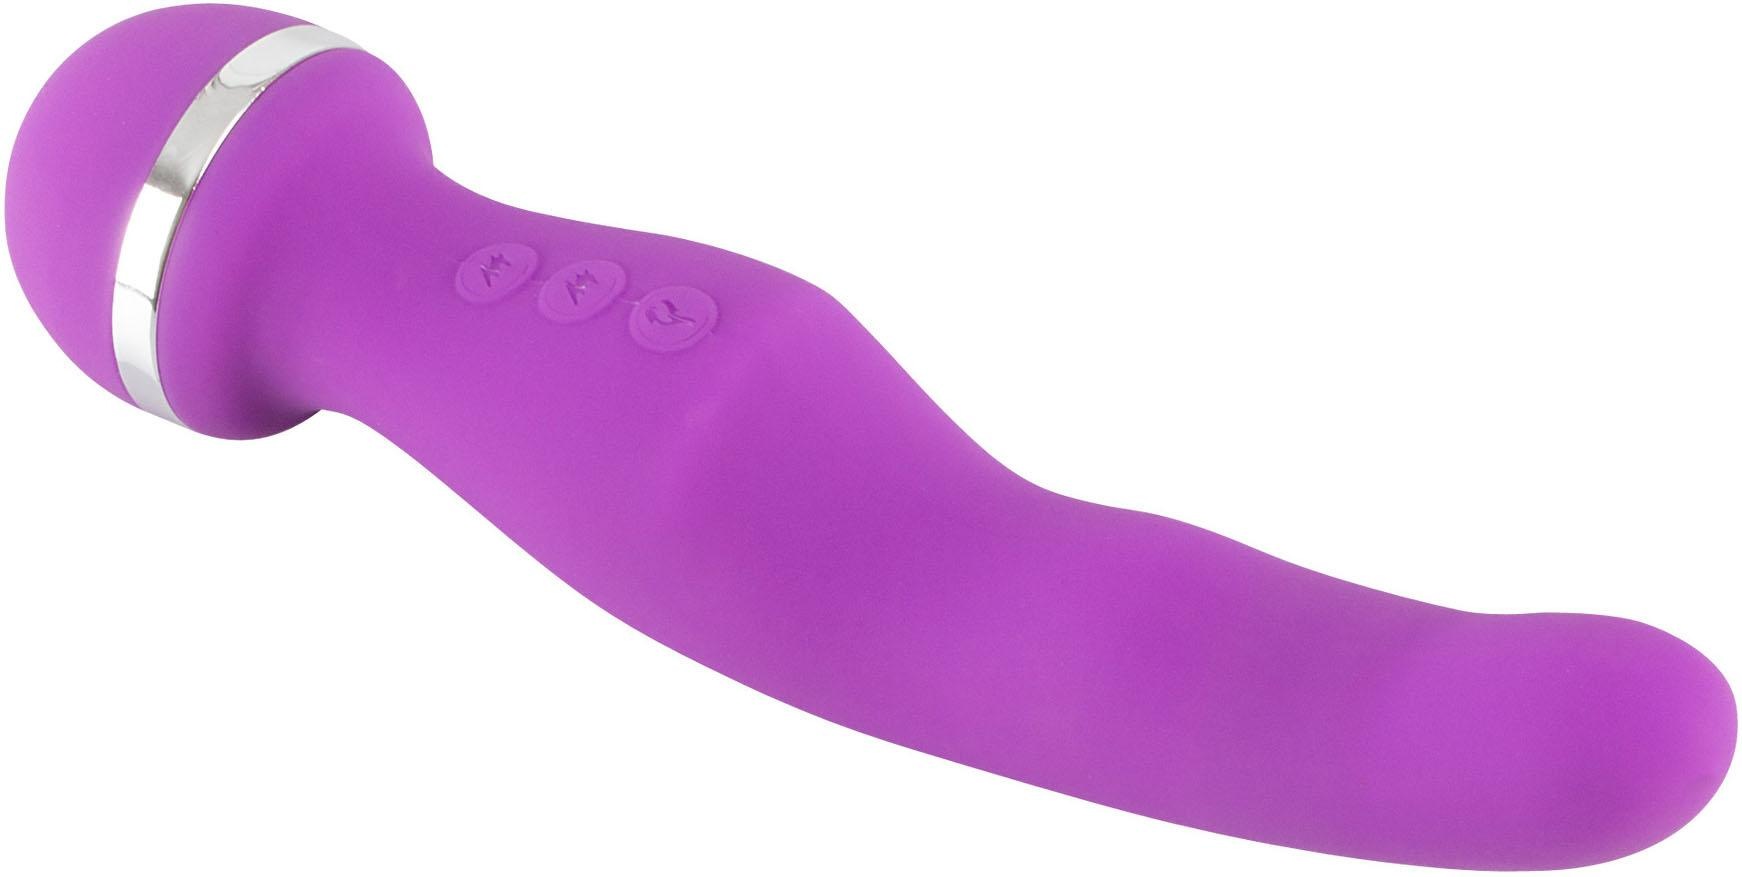 You2Toys Wand Massager »Rechargeable Warming Vibe«, 2-in-1